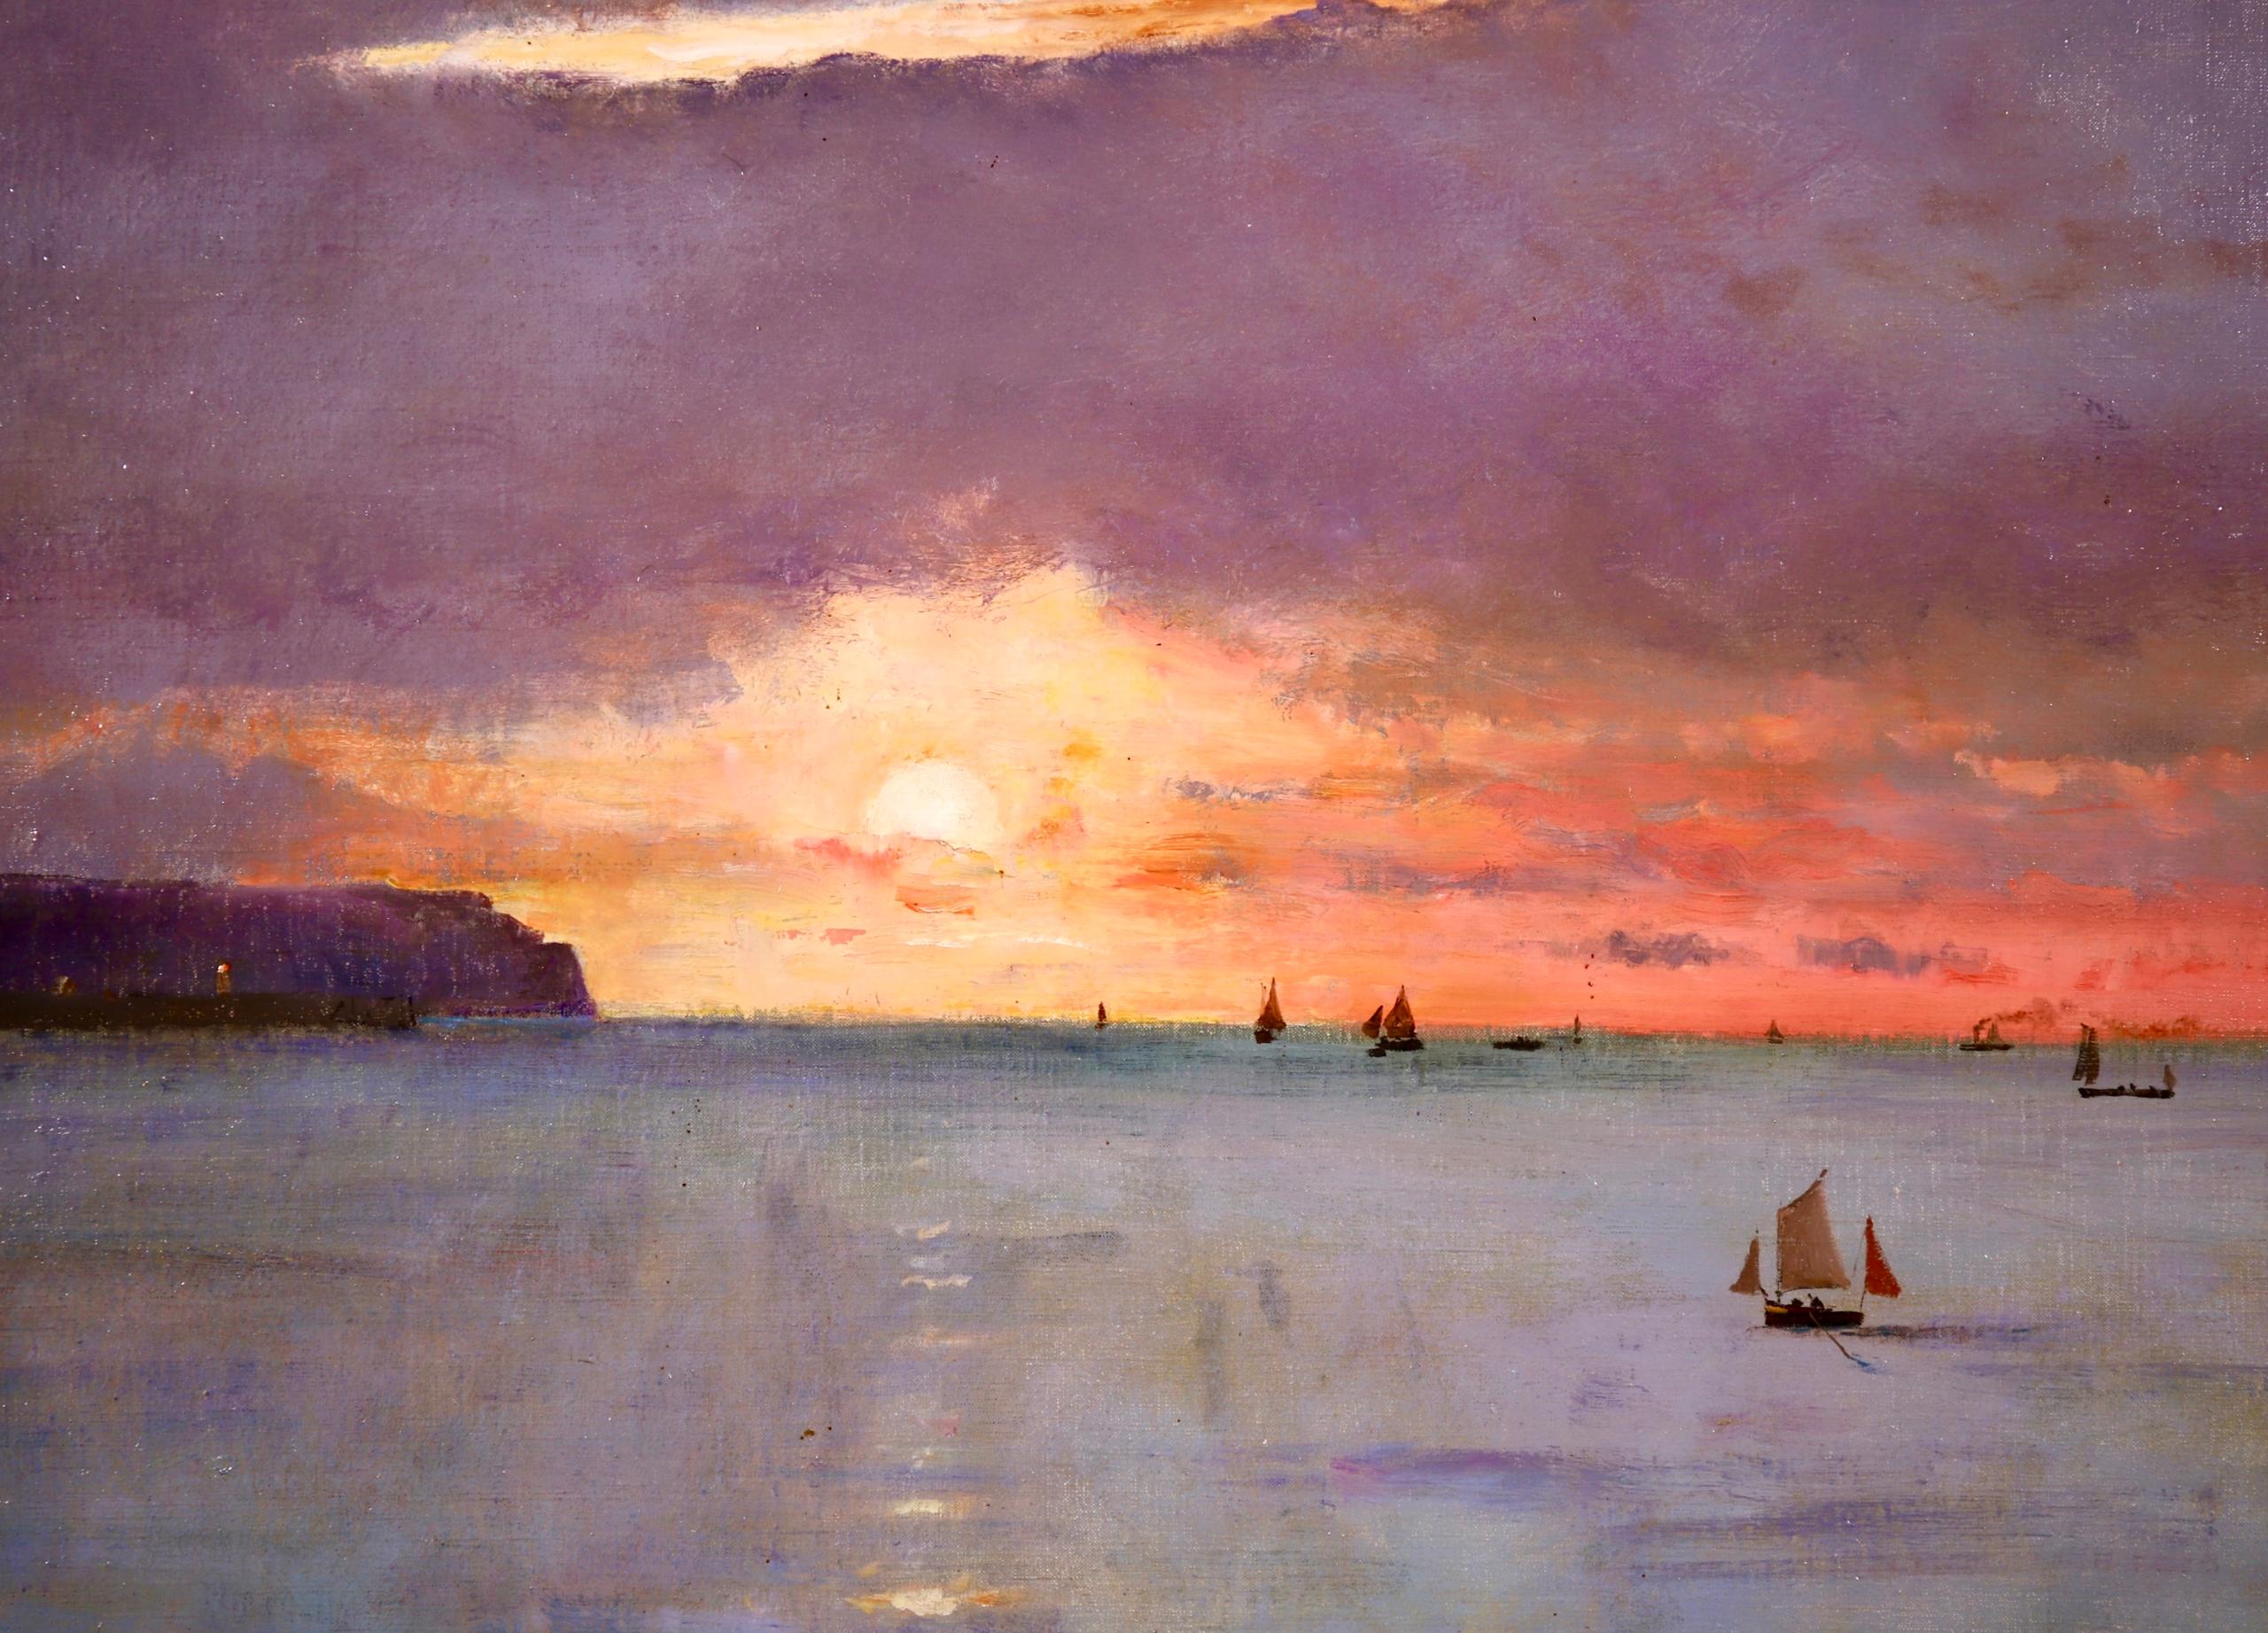 Signed and dated seascape oil on canvas by Belgian Realist painter Alfred Emile Leopold Stevens. The work depicts a sail boats off the coast of Dieppe at Plage de Puys. The painting shows the sunsetting on the horizon creating beautiful yellow and